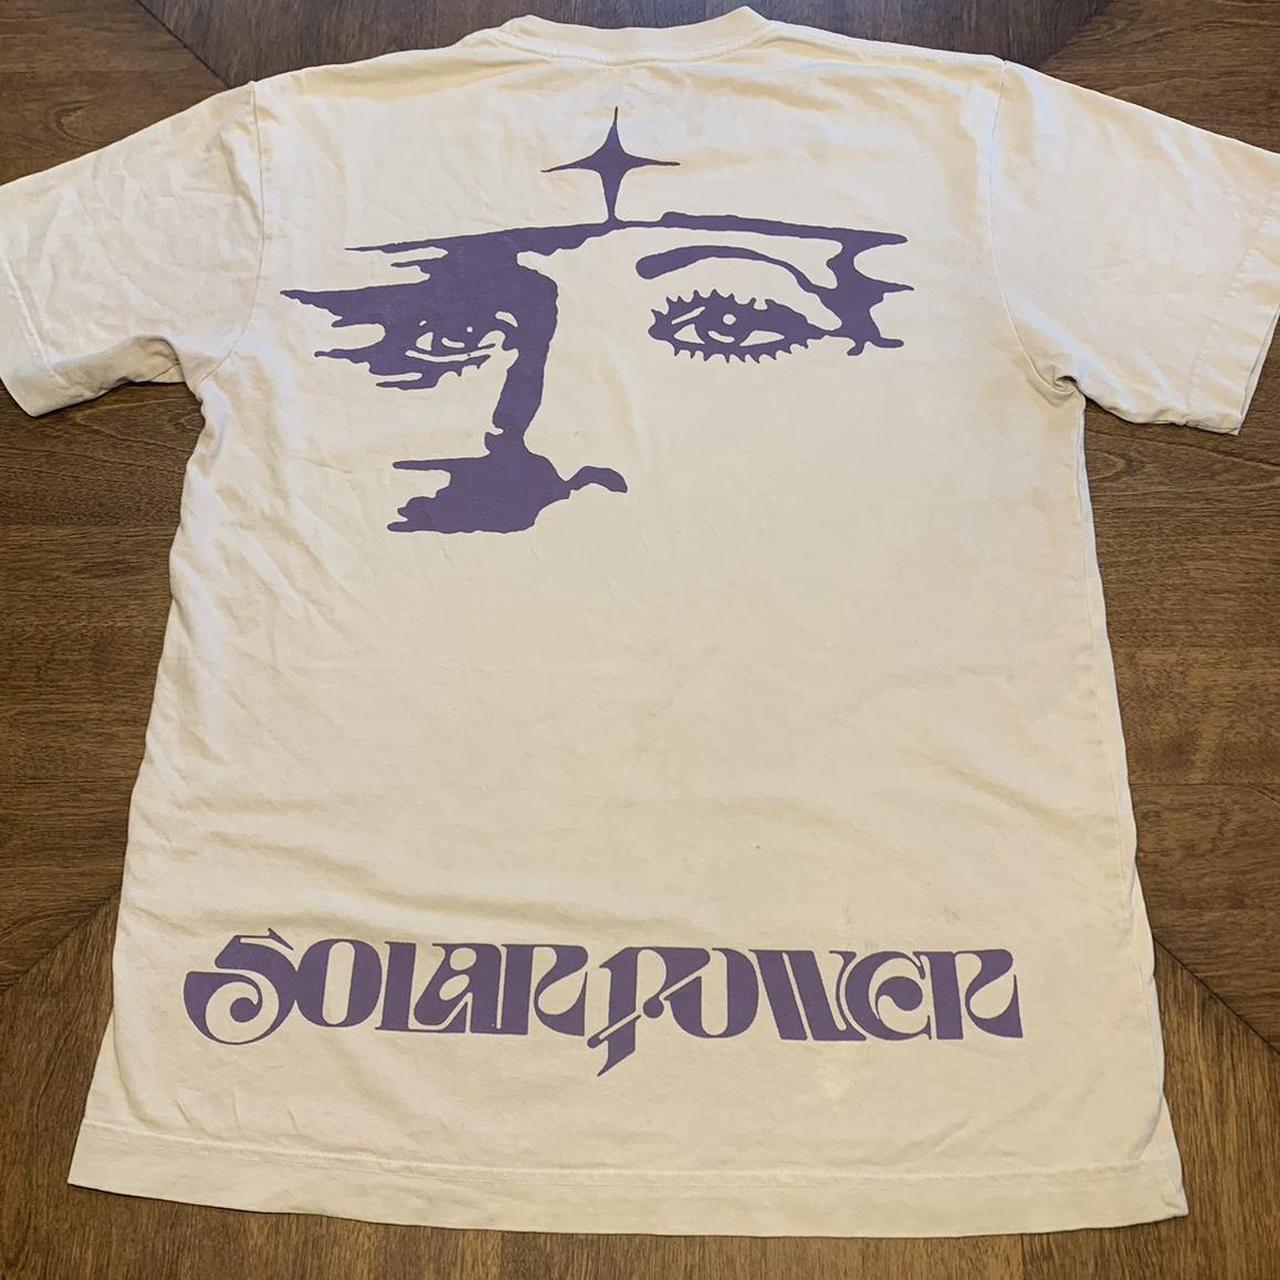 Solar power Lorde merch tee Sold out and very... - Depop